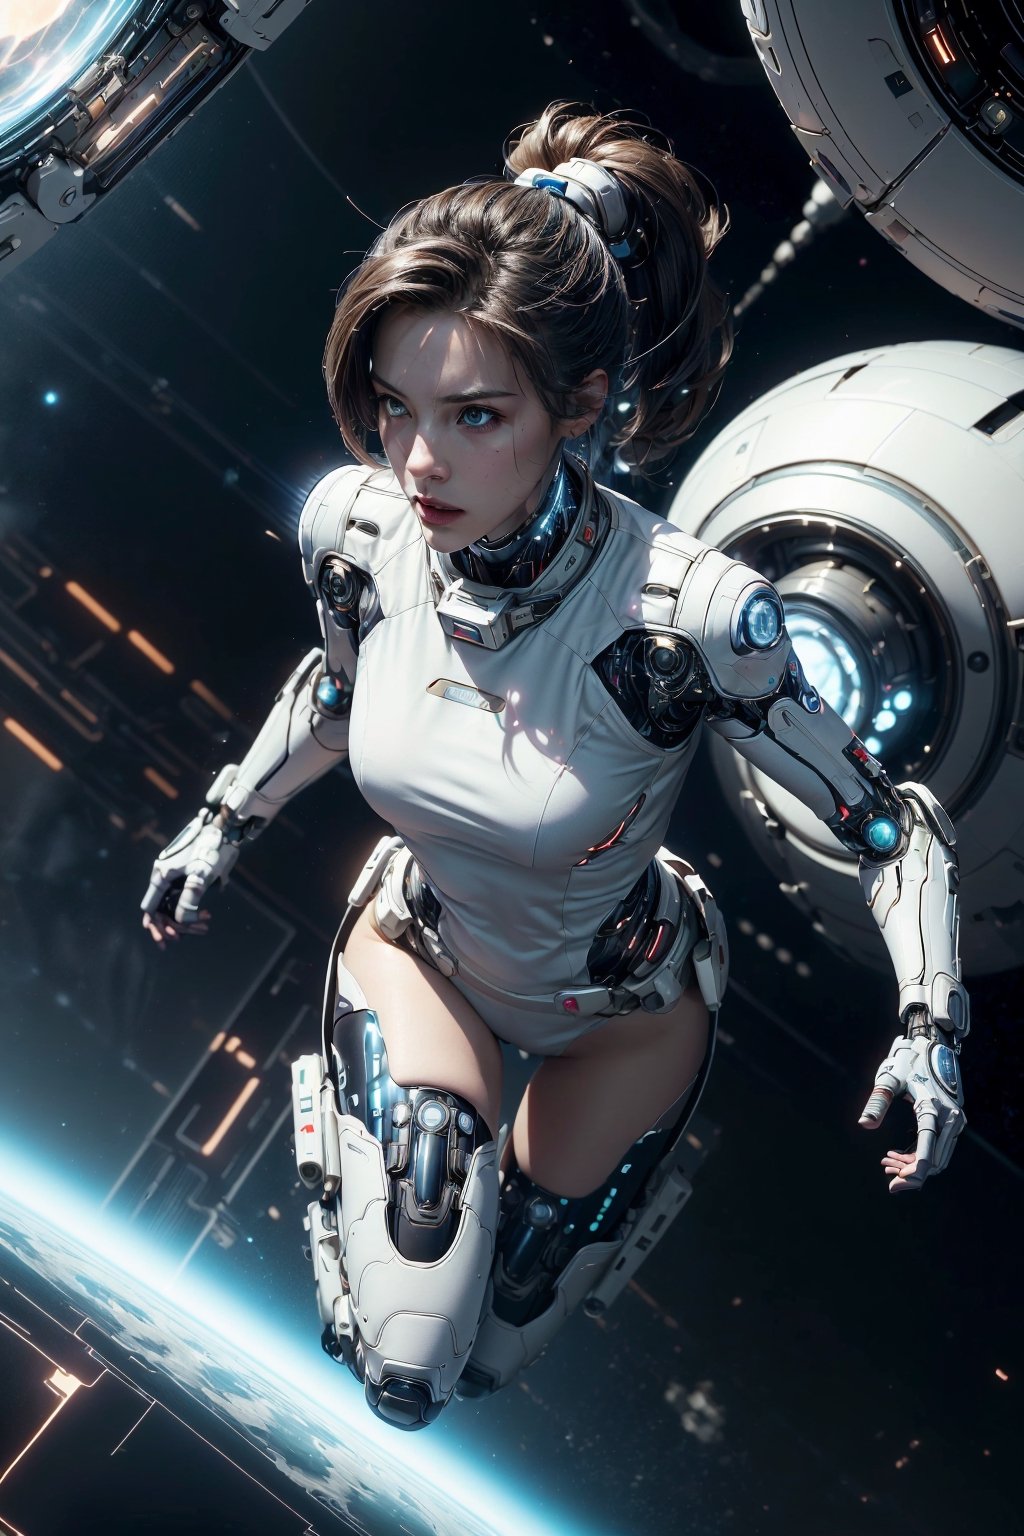 (4k), (masterpiece), (best quality),(extremely intricate), (realistic), (sharp focus), (cinematic lighting), (extremely detailed), (full body),

A young girl with cybernetic prosthetics and explosion magic floats in the zero-gravity environment of a space station. She is wearing a white spacesuit and a pair of goggles. Her hair is tied back in a ponytail, and her face is determined. Her cybernetic prosthetics are enhanced with powerful thrusters, allowing her to maneuver with ease. She is a spacefaring cybernetic sorceress.

,explosionmagic, excessive energy, smoke, glowing aura
, neotech, scifi, sleek